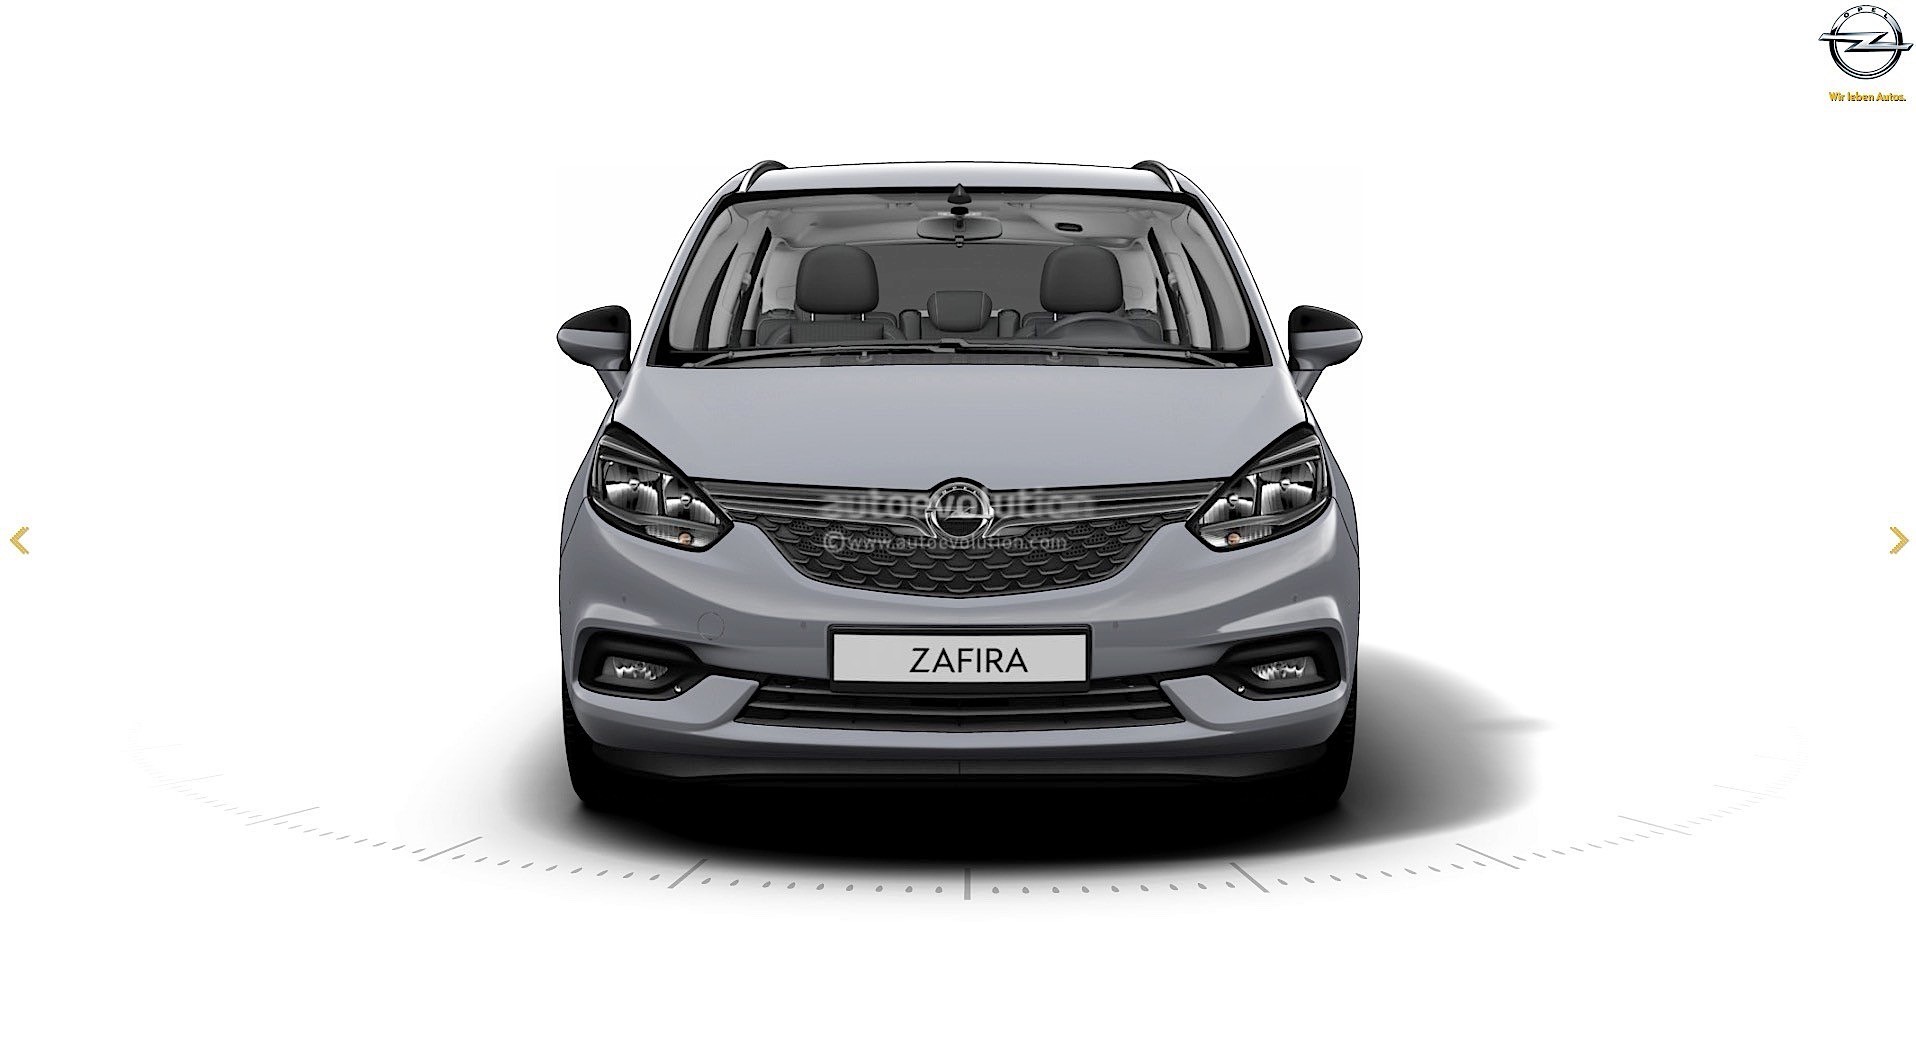 2017-opel-zafira-facelift-leaked-on-gm-website-here-are-the-first-pics_5-autonovosti.me-4